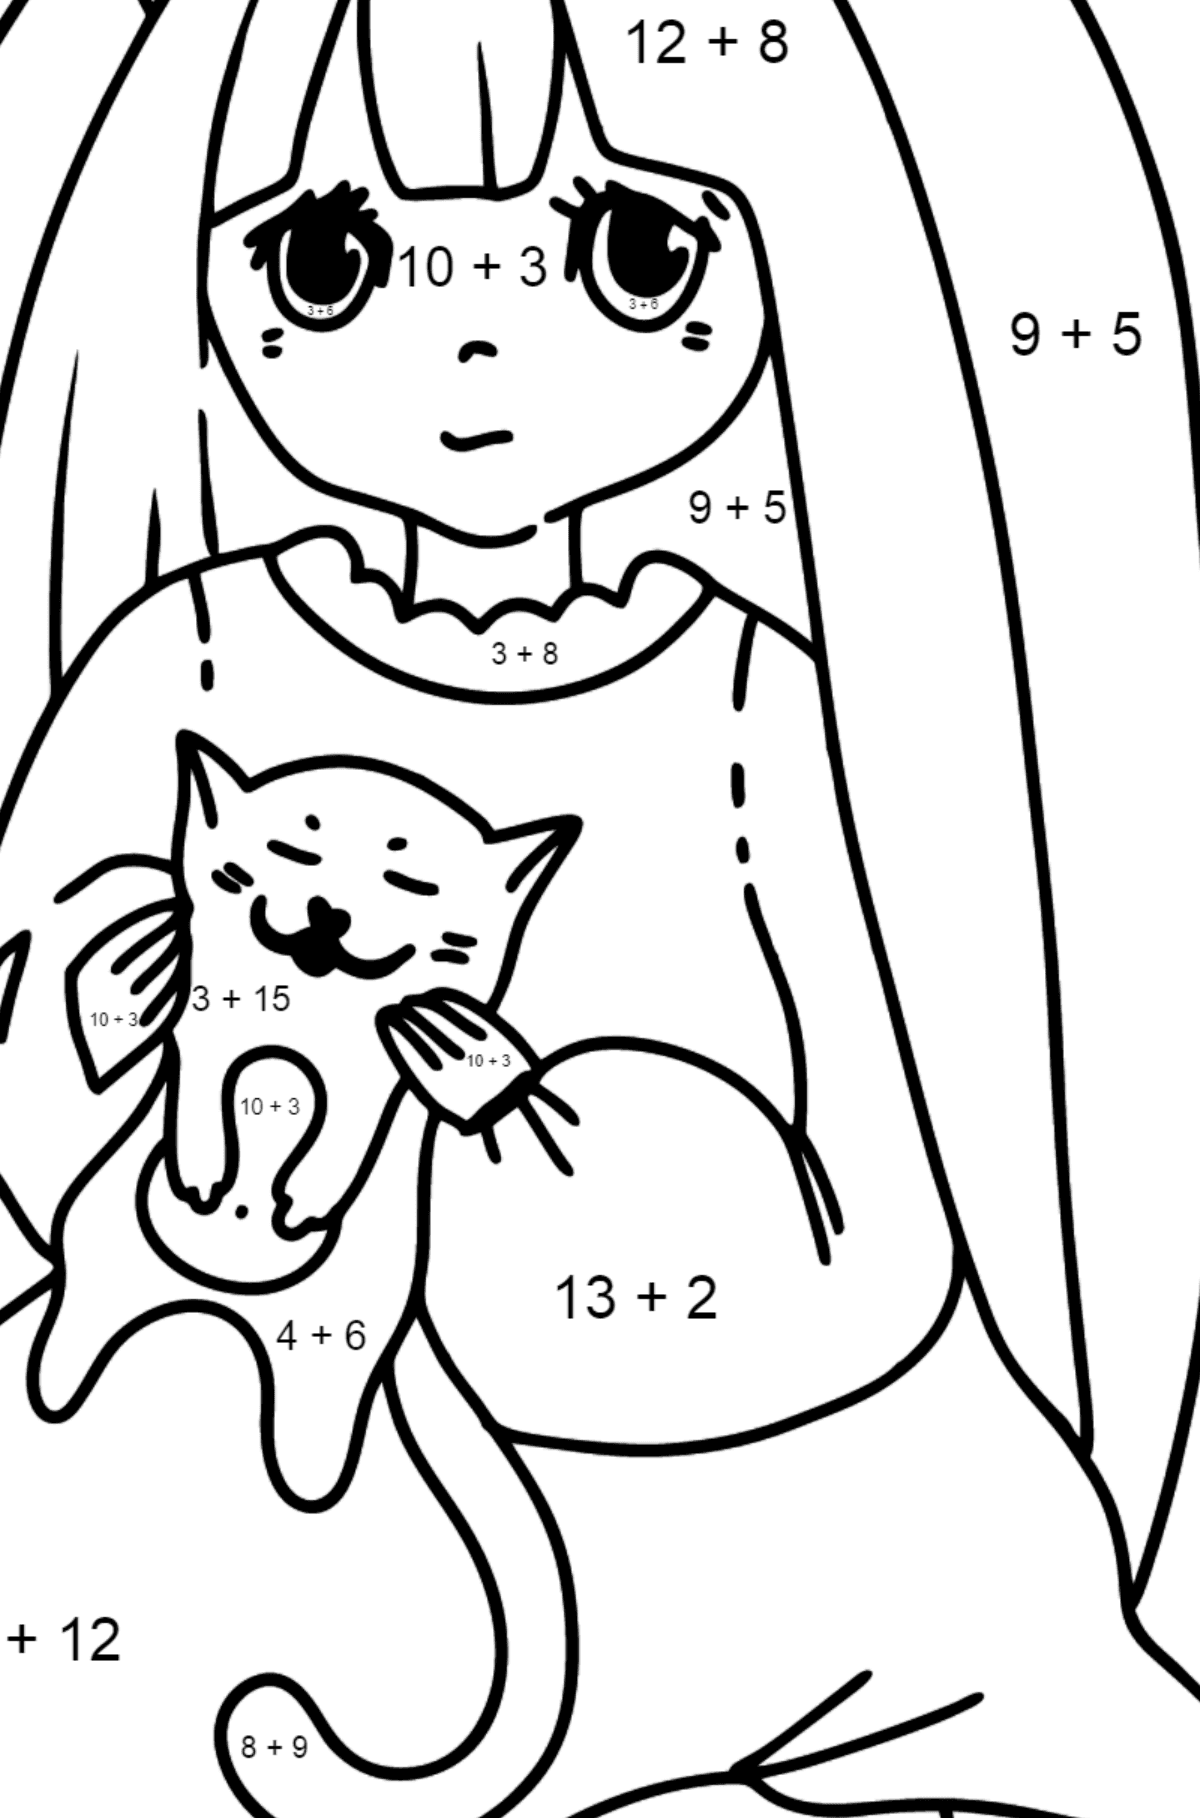 Anime Girl Playing with Kitten coloring page - Math Coloring - Addition for Kids